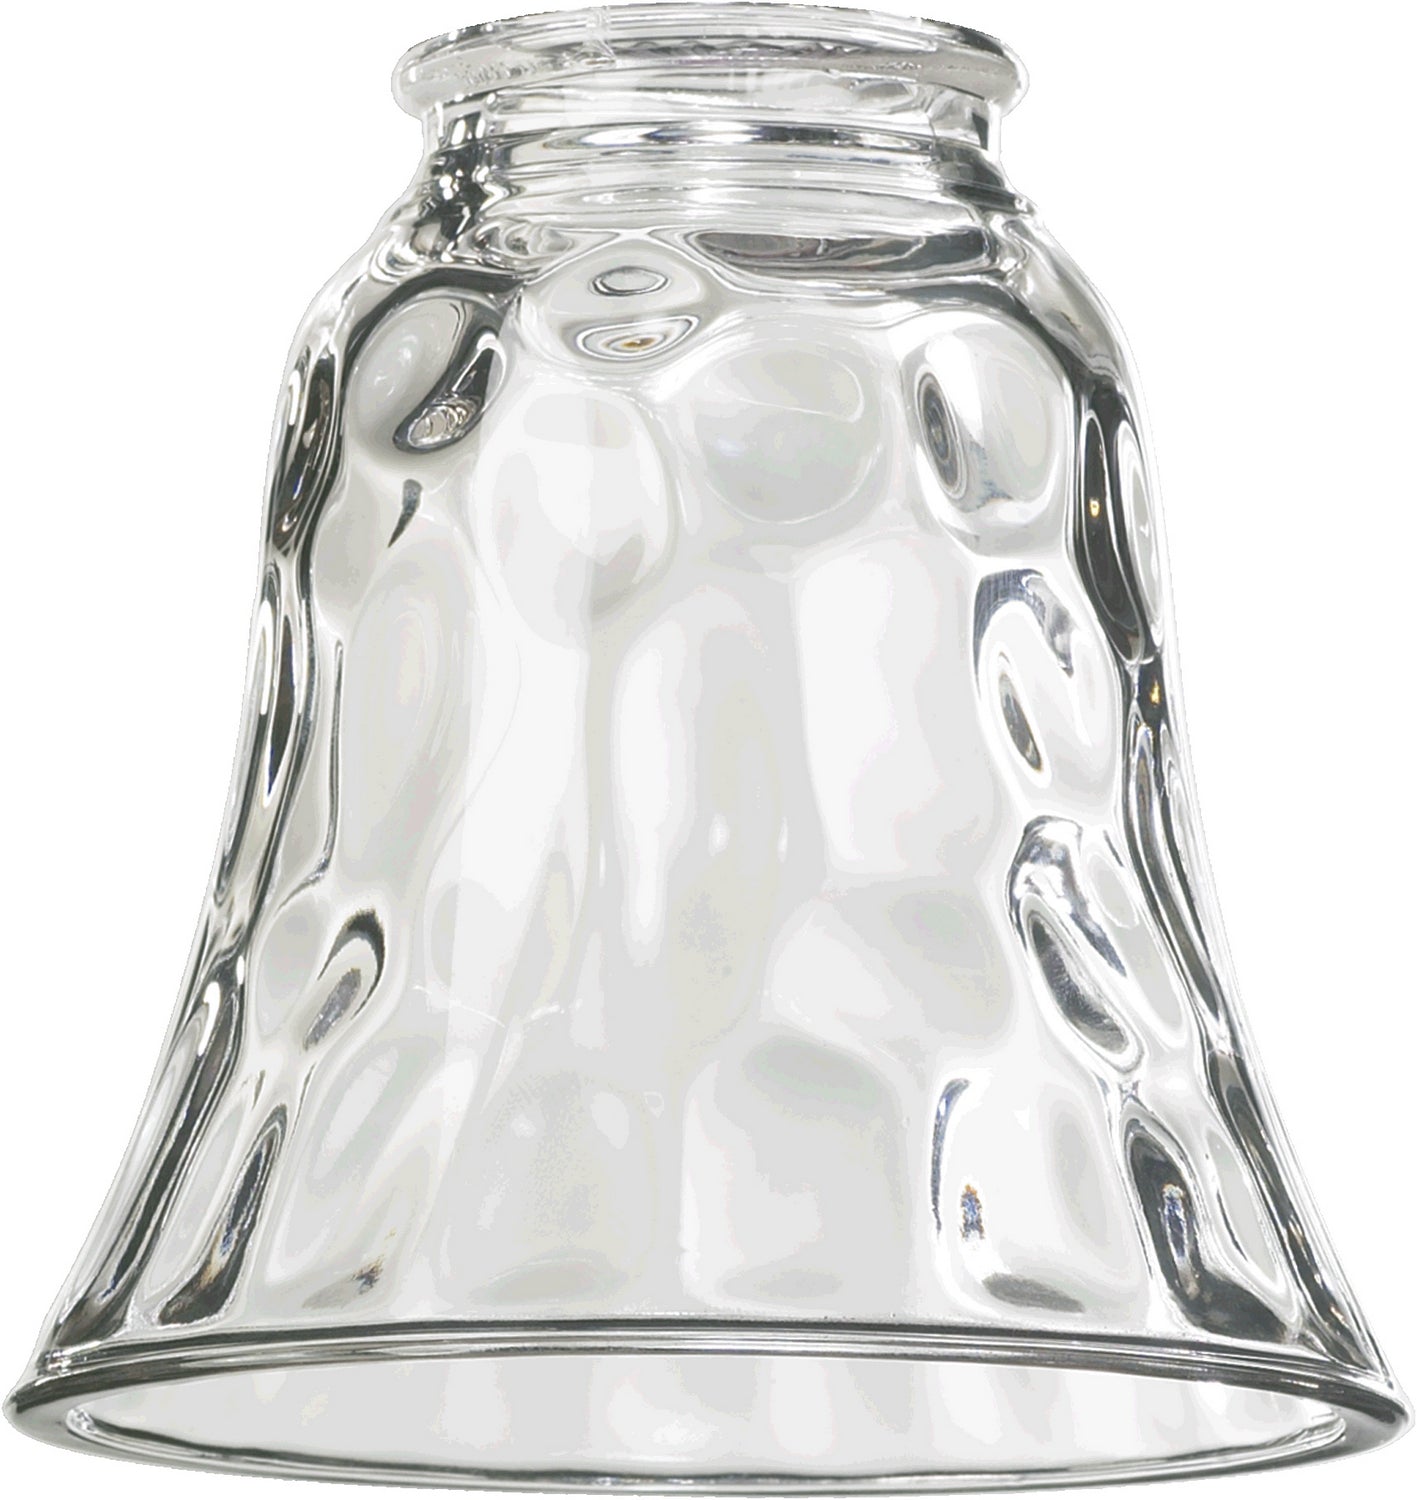 Quorum - 2104 - Glass - Glass Series - Clear